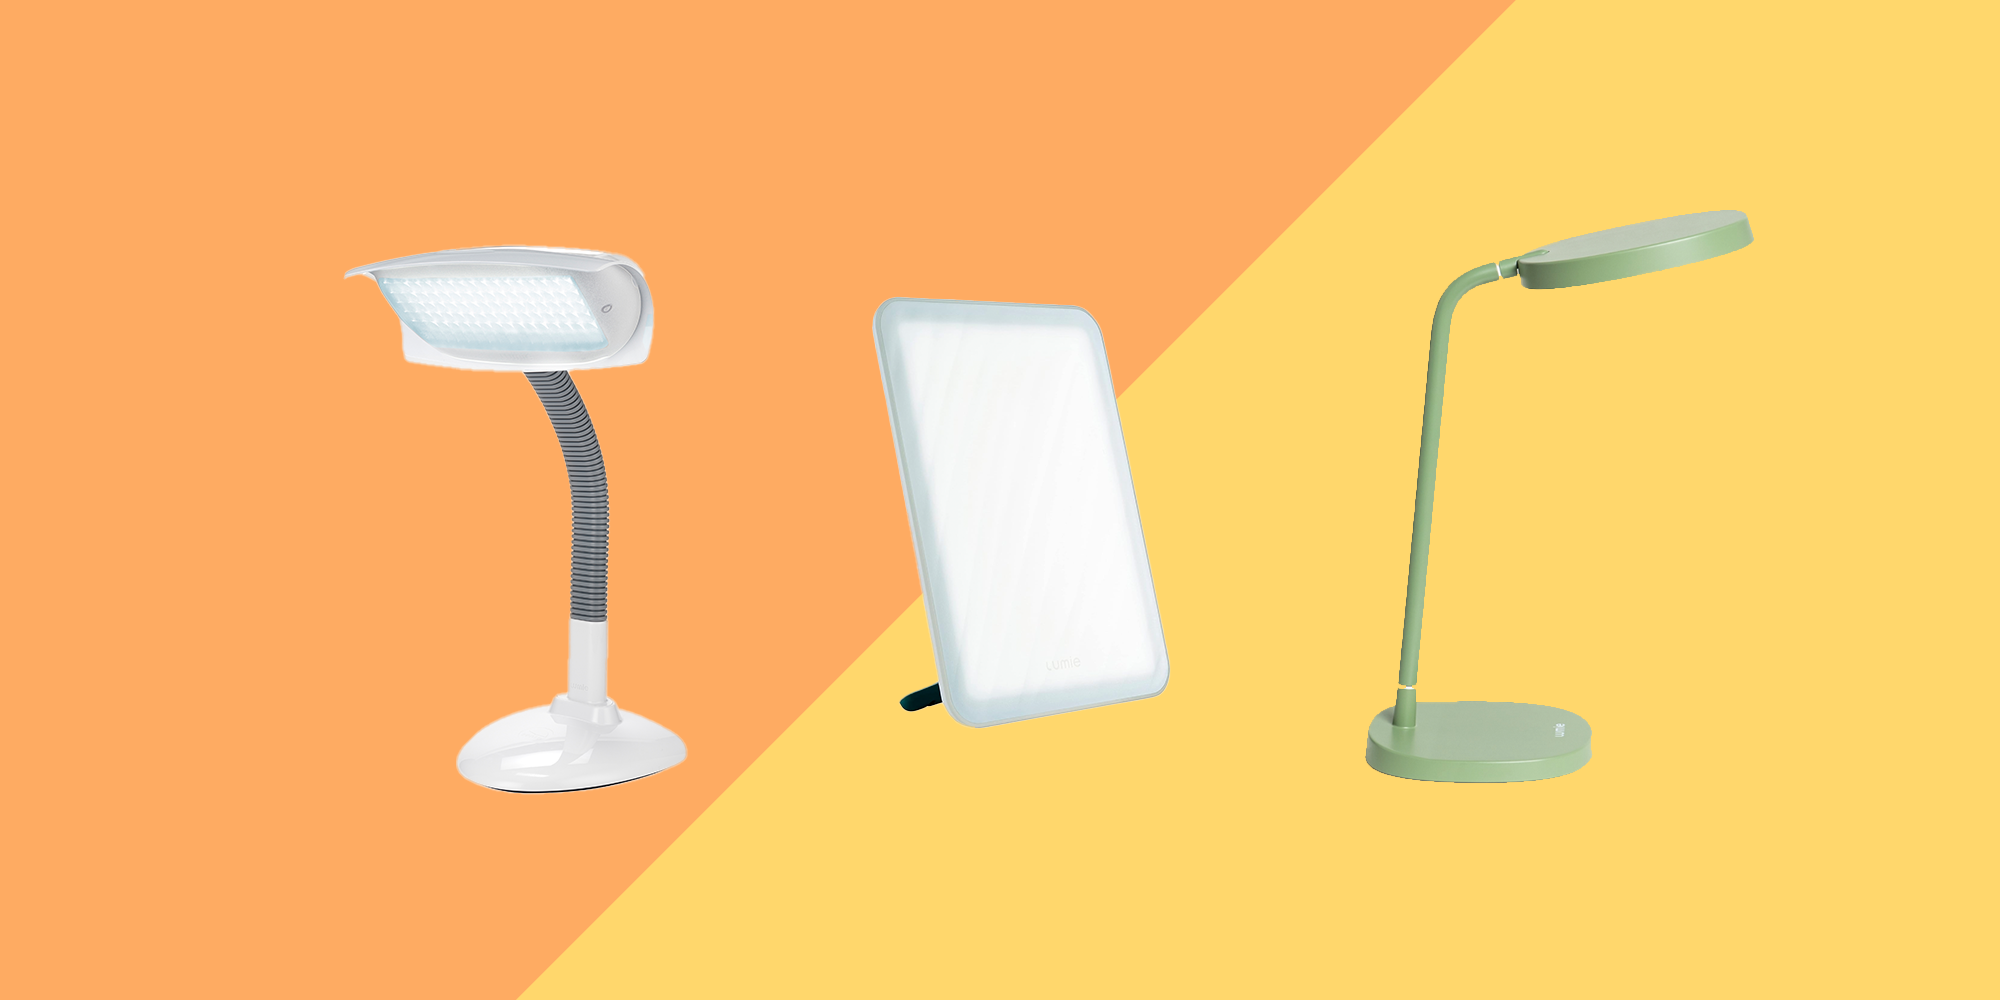 Light Therapy Lamps To Try If You Find Dark Days Depressing